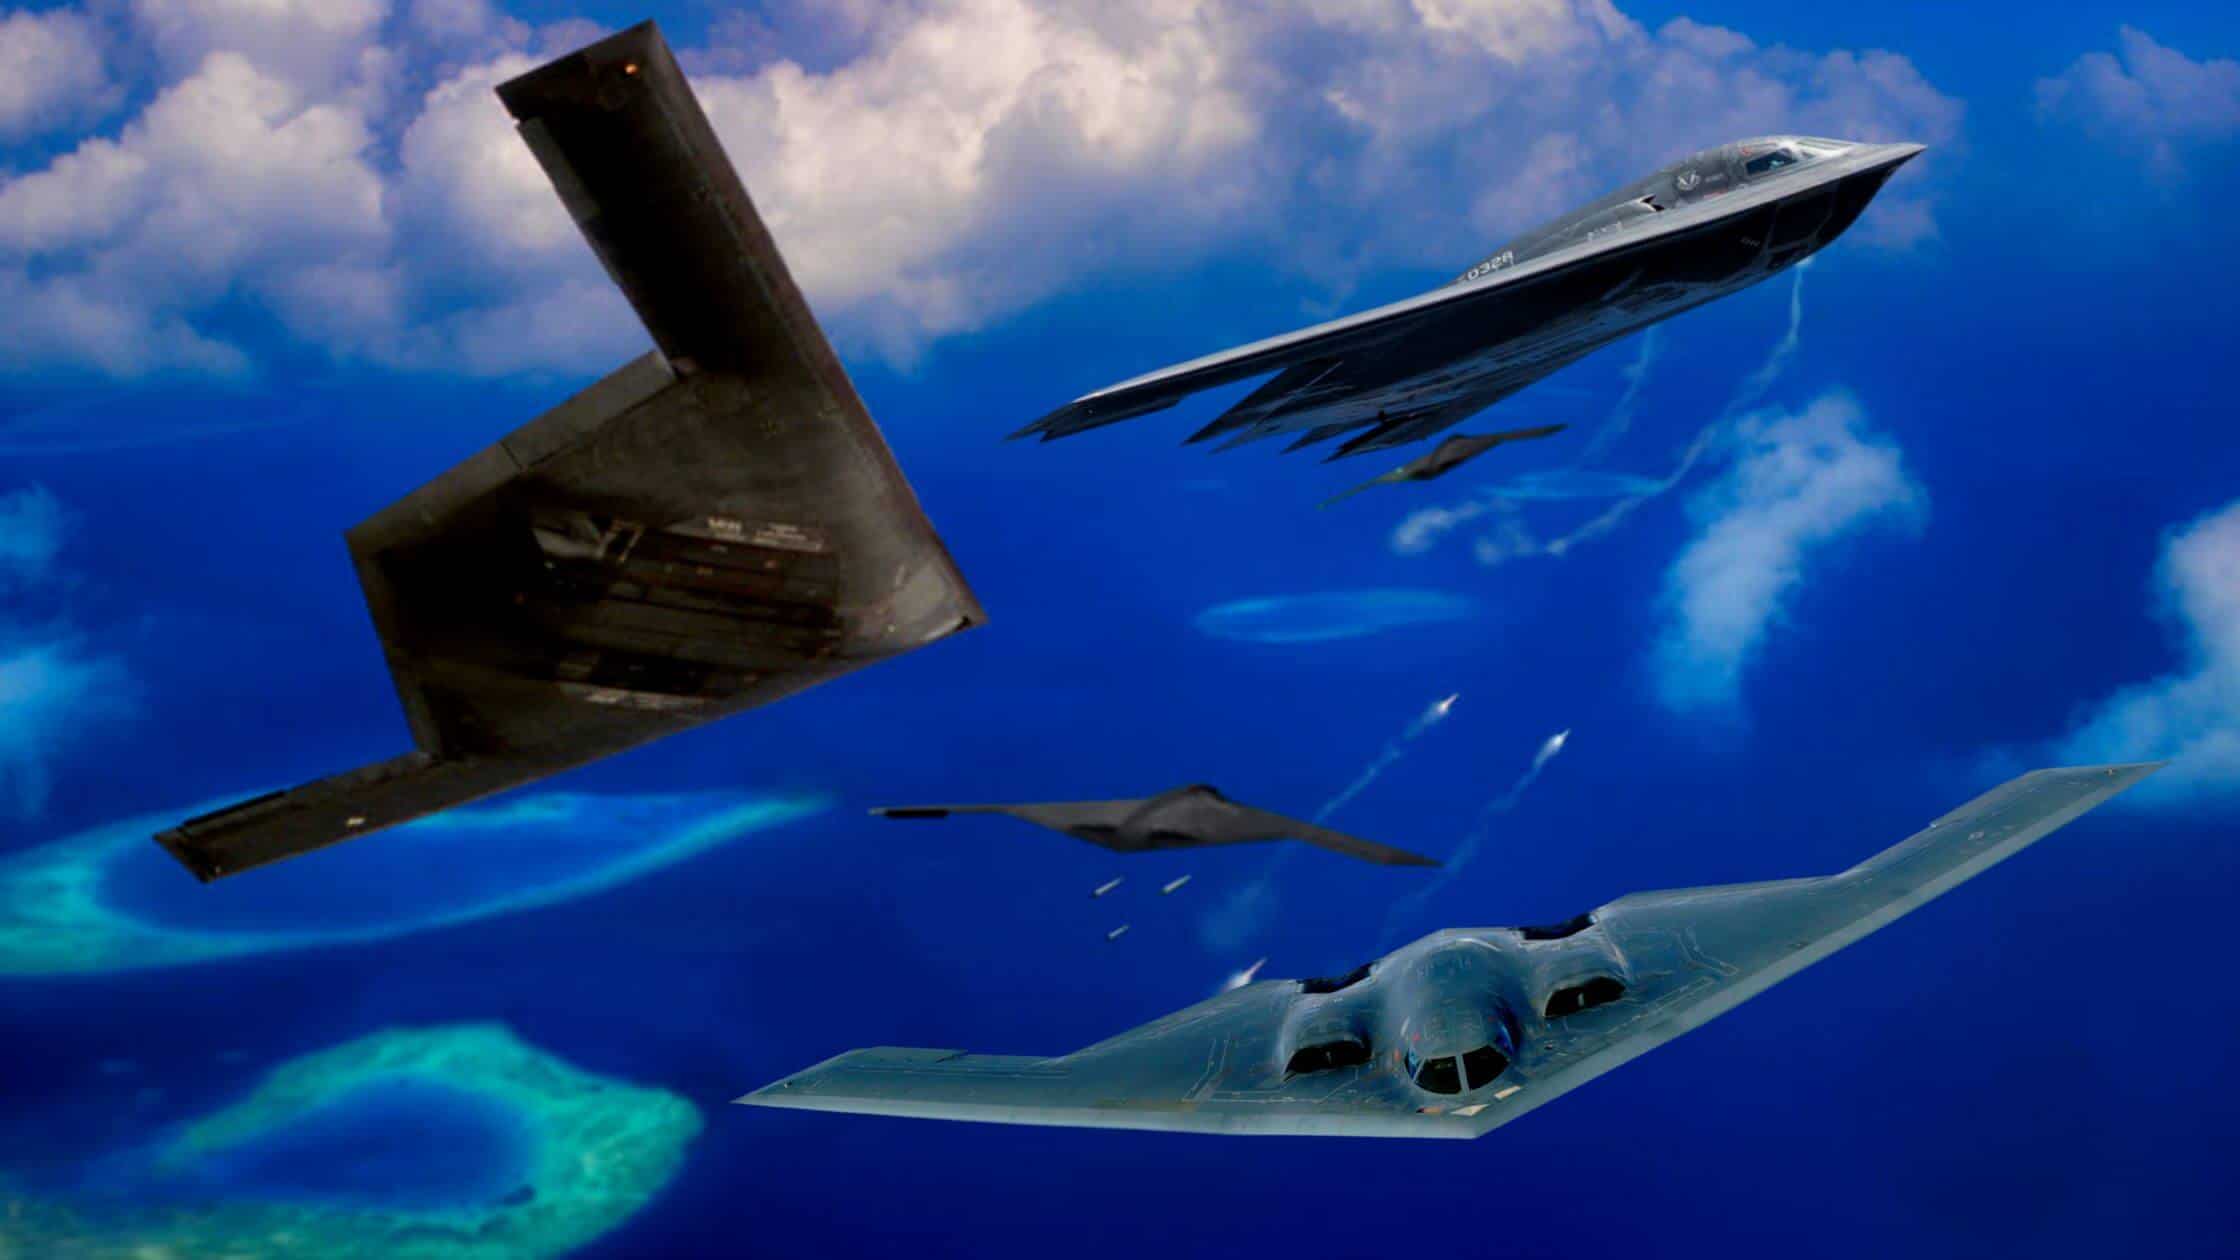 B-21 Raider Stealth Bomber To Be Launched By US Air Force On Friday